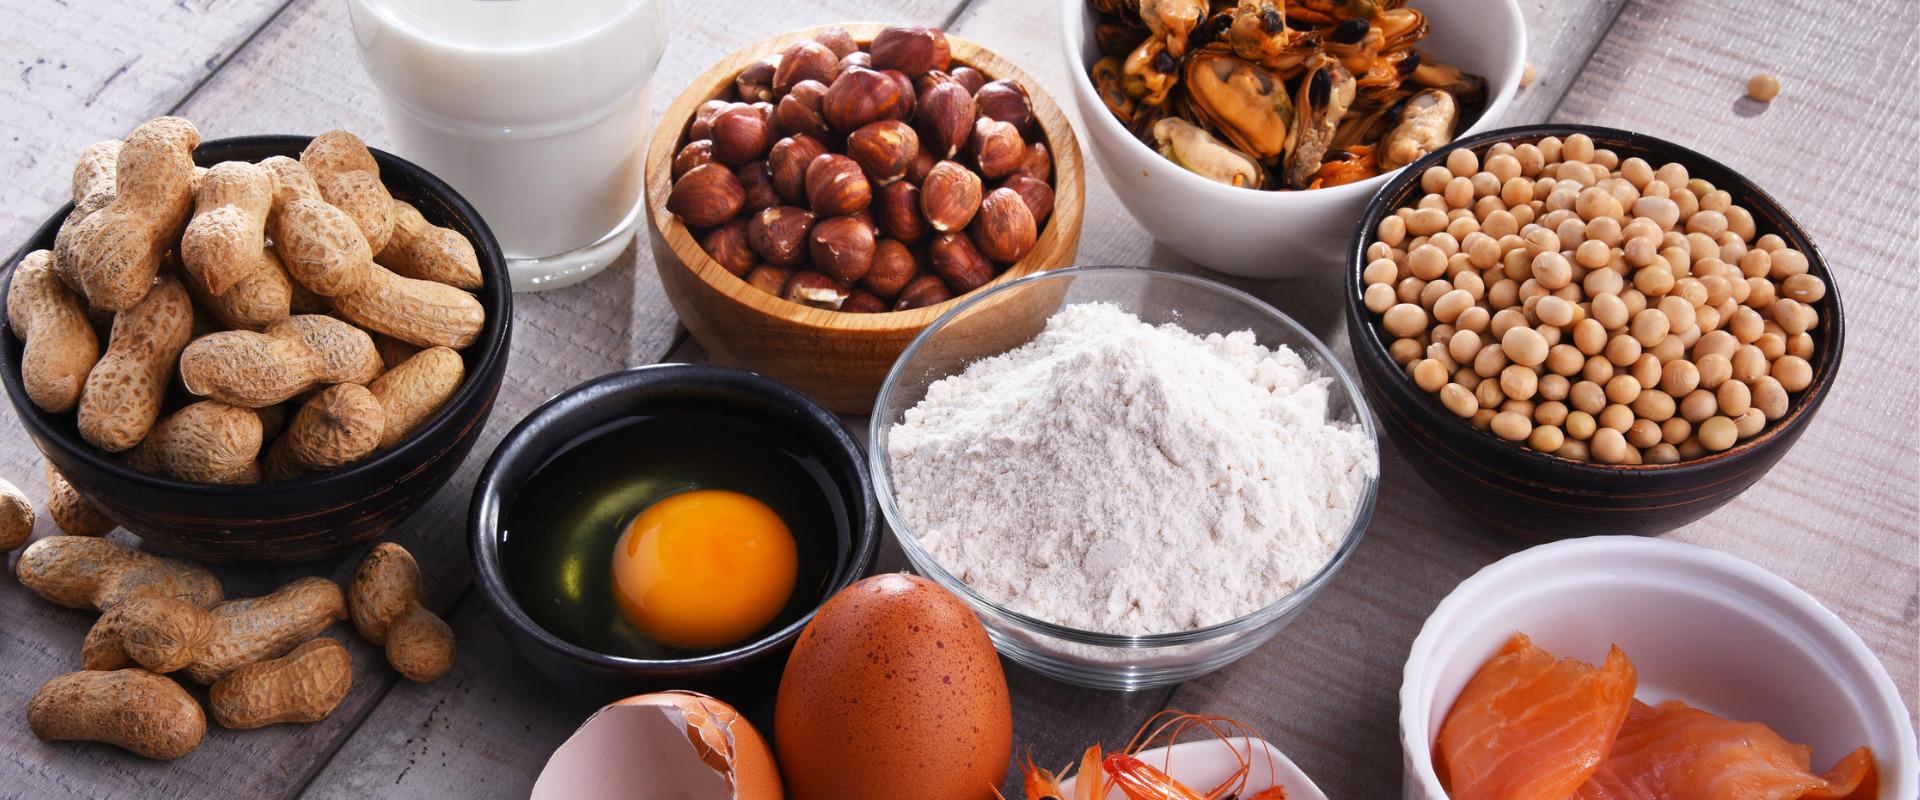 assortment of common food allergens including eggs, peanuts, flour, fish, milk, shellfish, and tree nuts